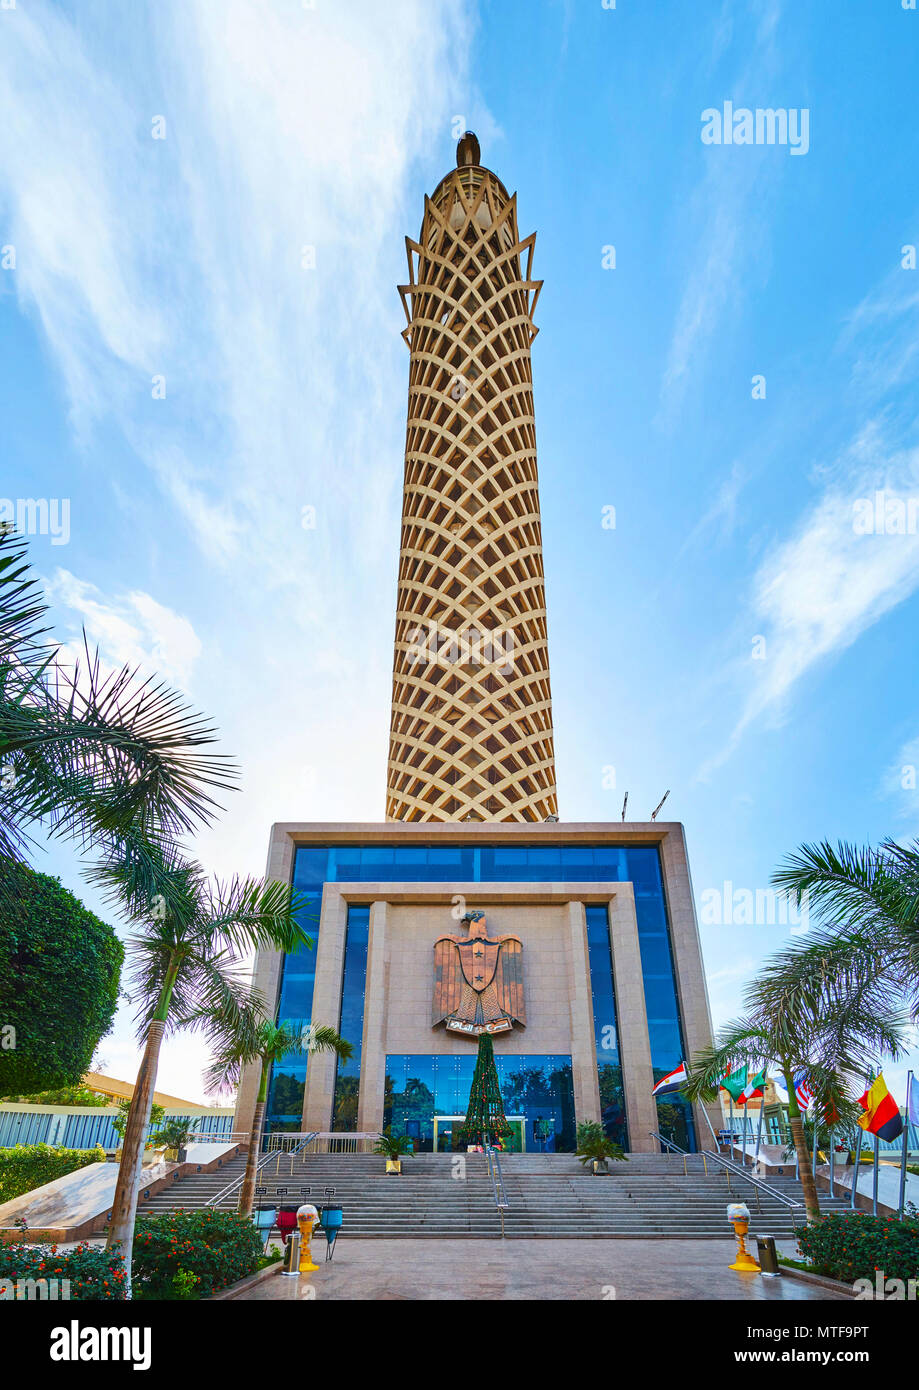 CAIRO, EGYPT - DECEMBER 24, 2017: The entrance to Cairo Tower, decorated with the State Emblem of Egypt - the eagle, and surrounded by garden, on Dece Stock Photo